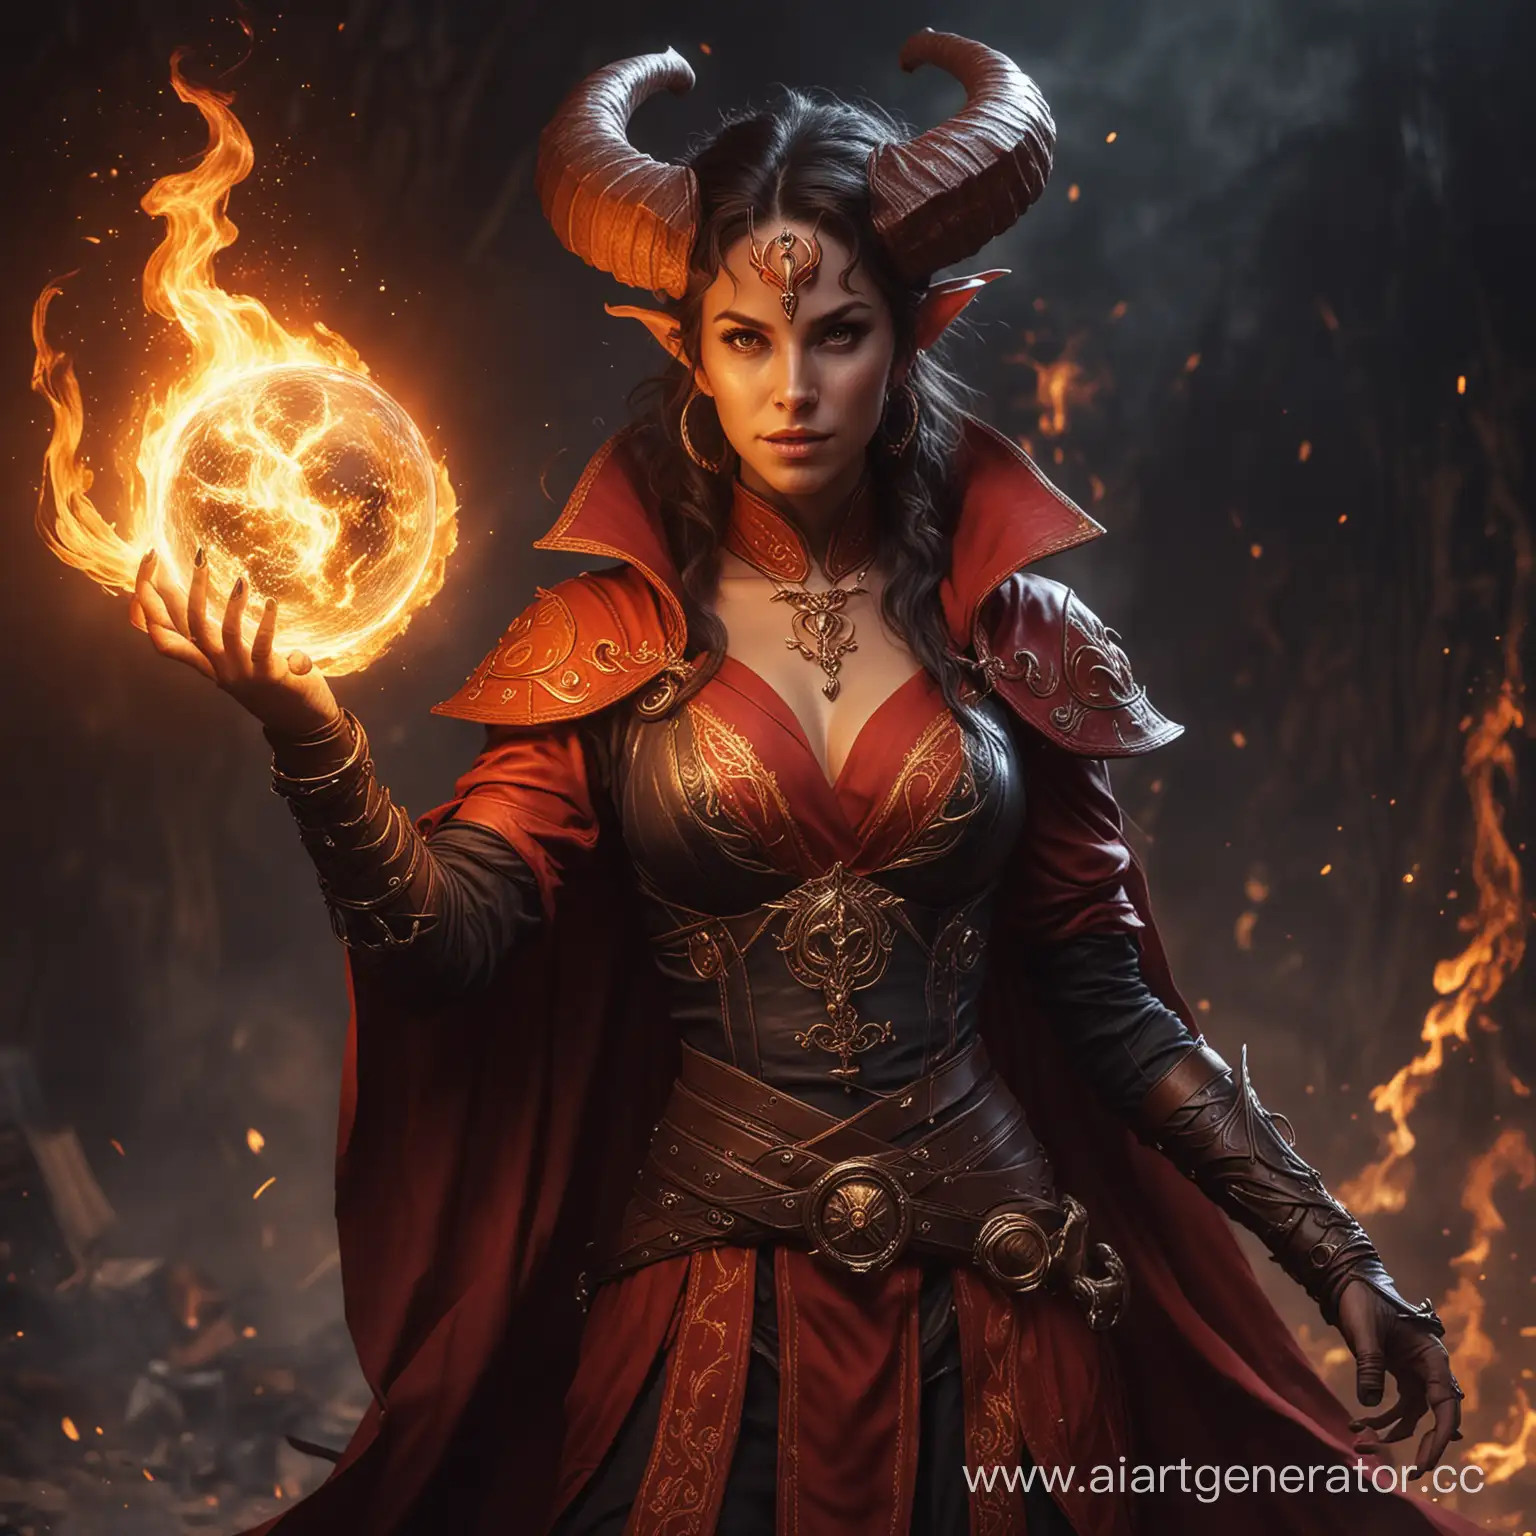 Tiefling-Sorceress-Conjuring-Flames-with-Magical-Sphere